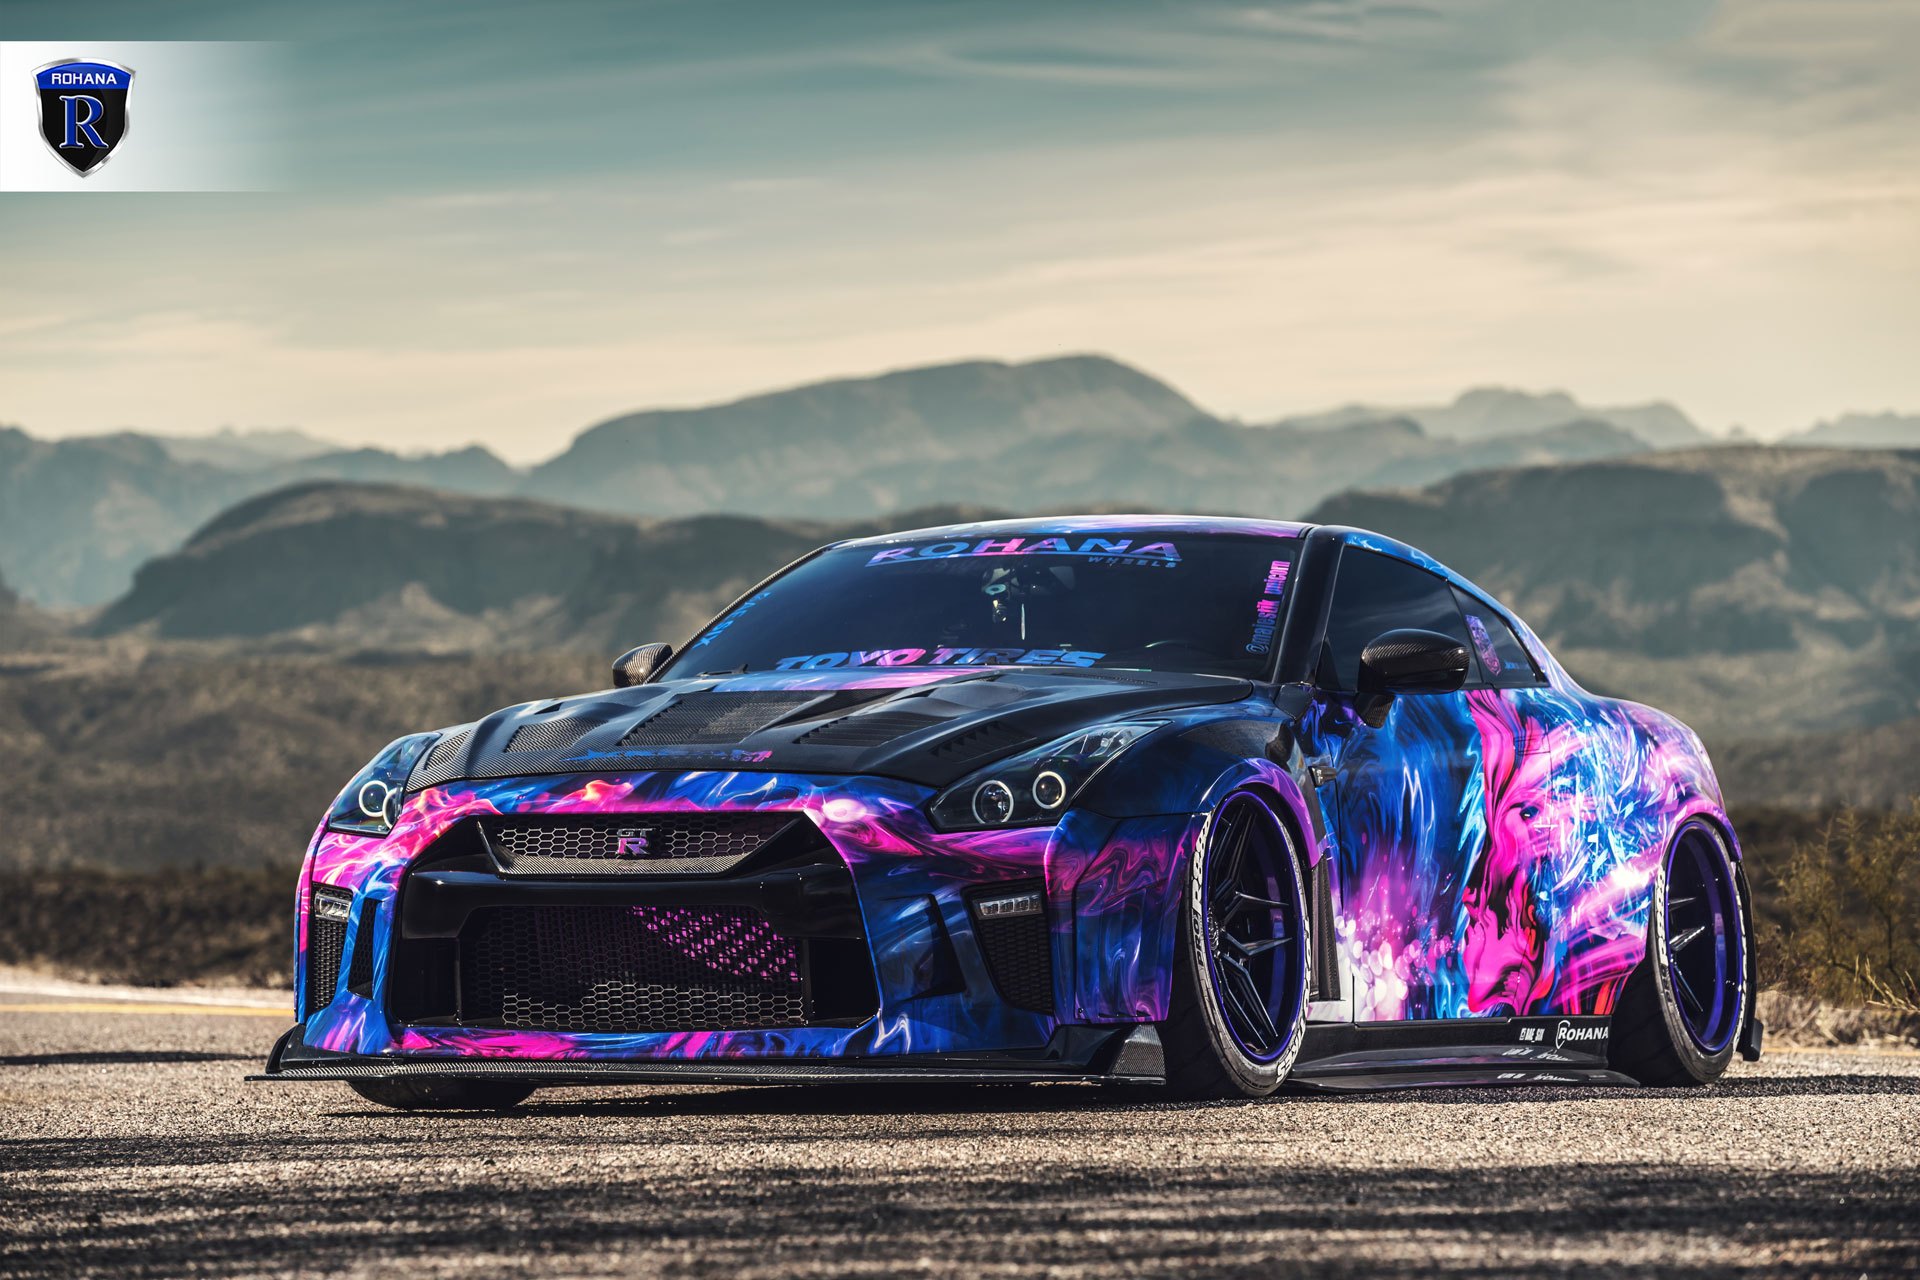 Carbon Fiber Vented Hood on Custom Painted Nissan GT-R - Photo by Rohana Wh...